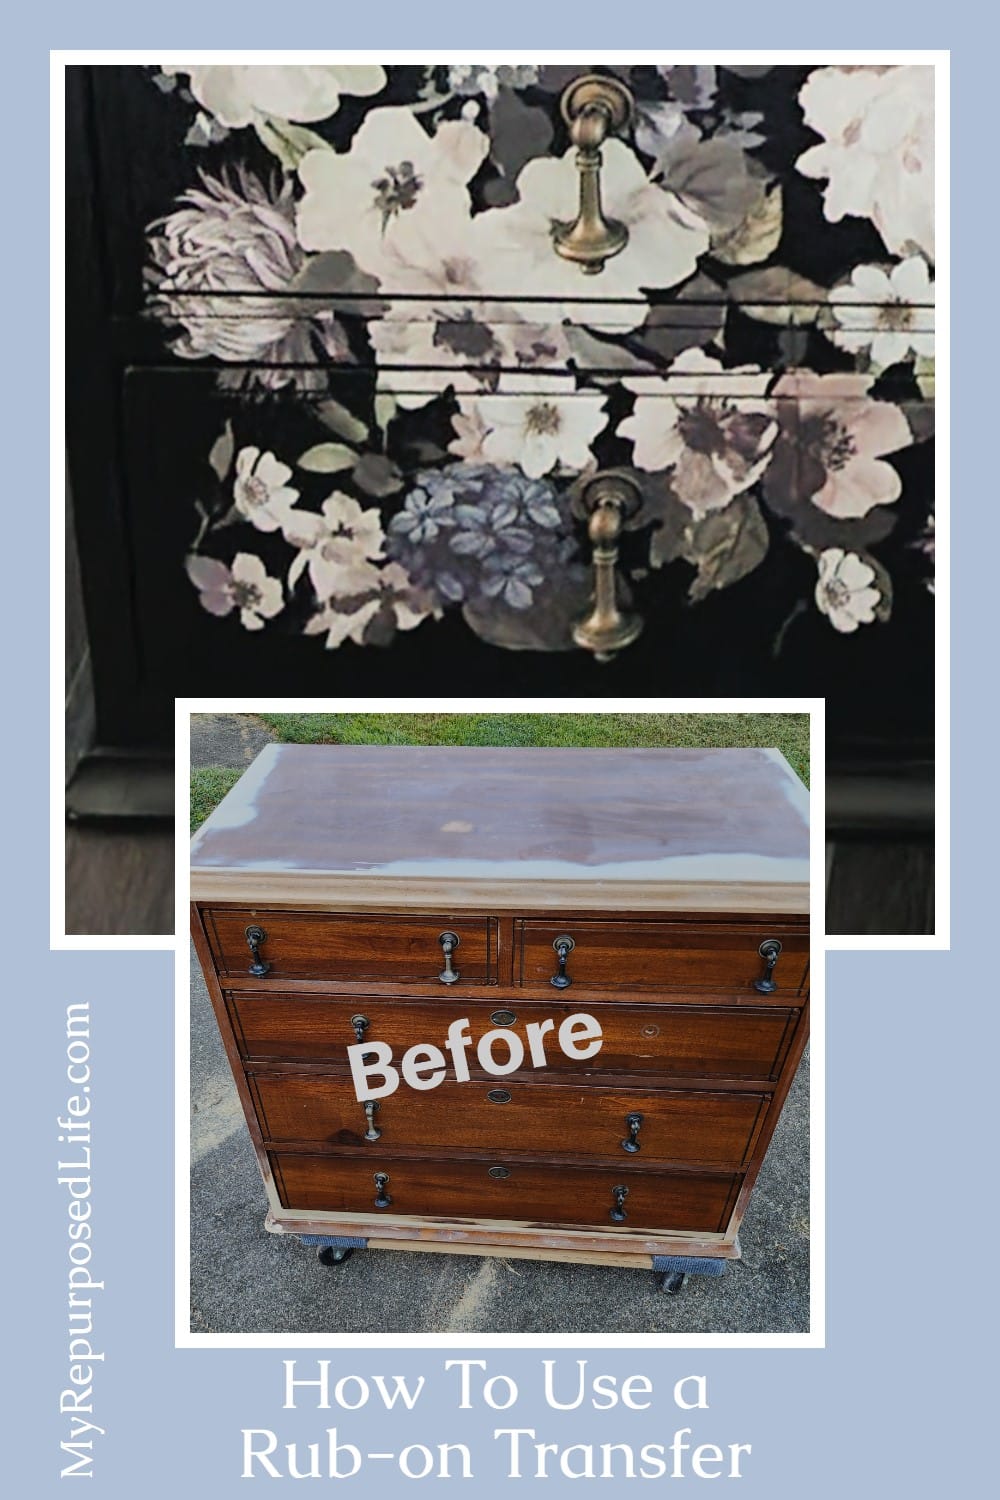 How to save an old piece of furniture and update it with a Prima Design Furniture Transfer. A beginner explains how easy it is to do. via @repurposedlife